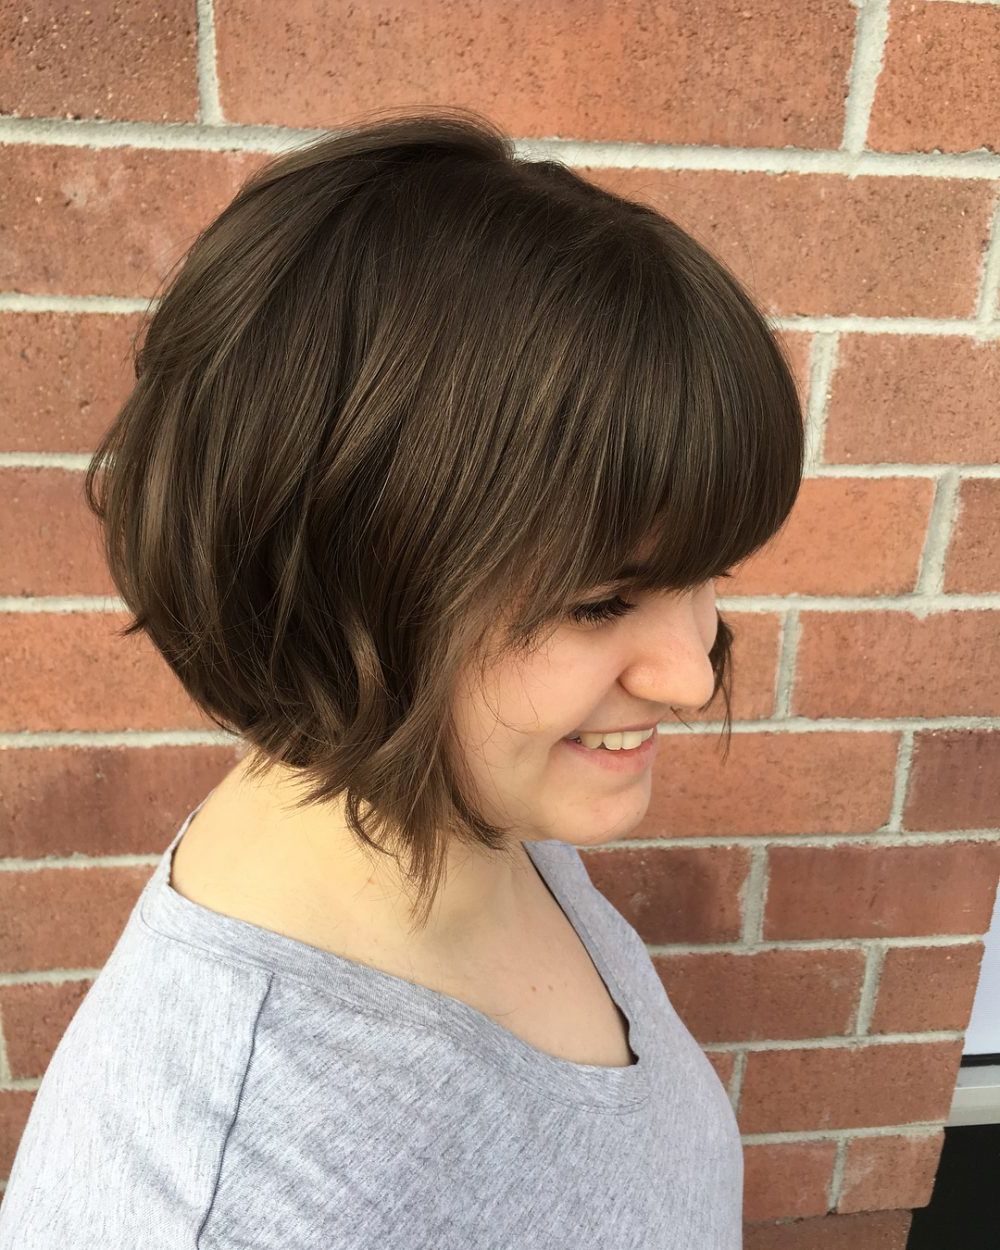 34 Greatest Short Haircuts And Hairstyles For Thick Hair For 2018 Regarding Short Haircuts With Side Bangs (Photo 8 of 25)